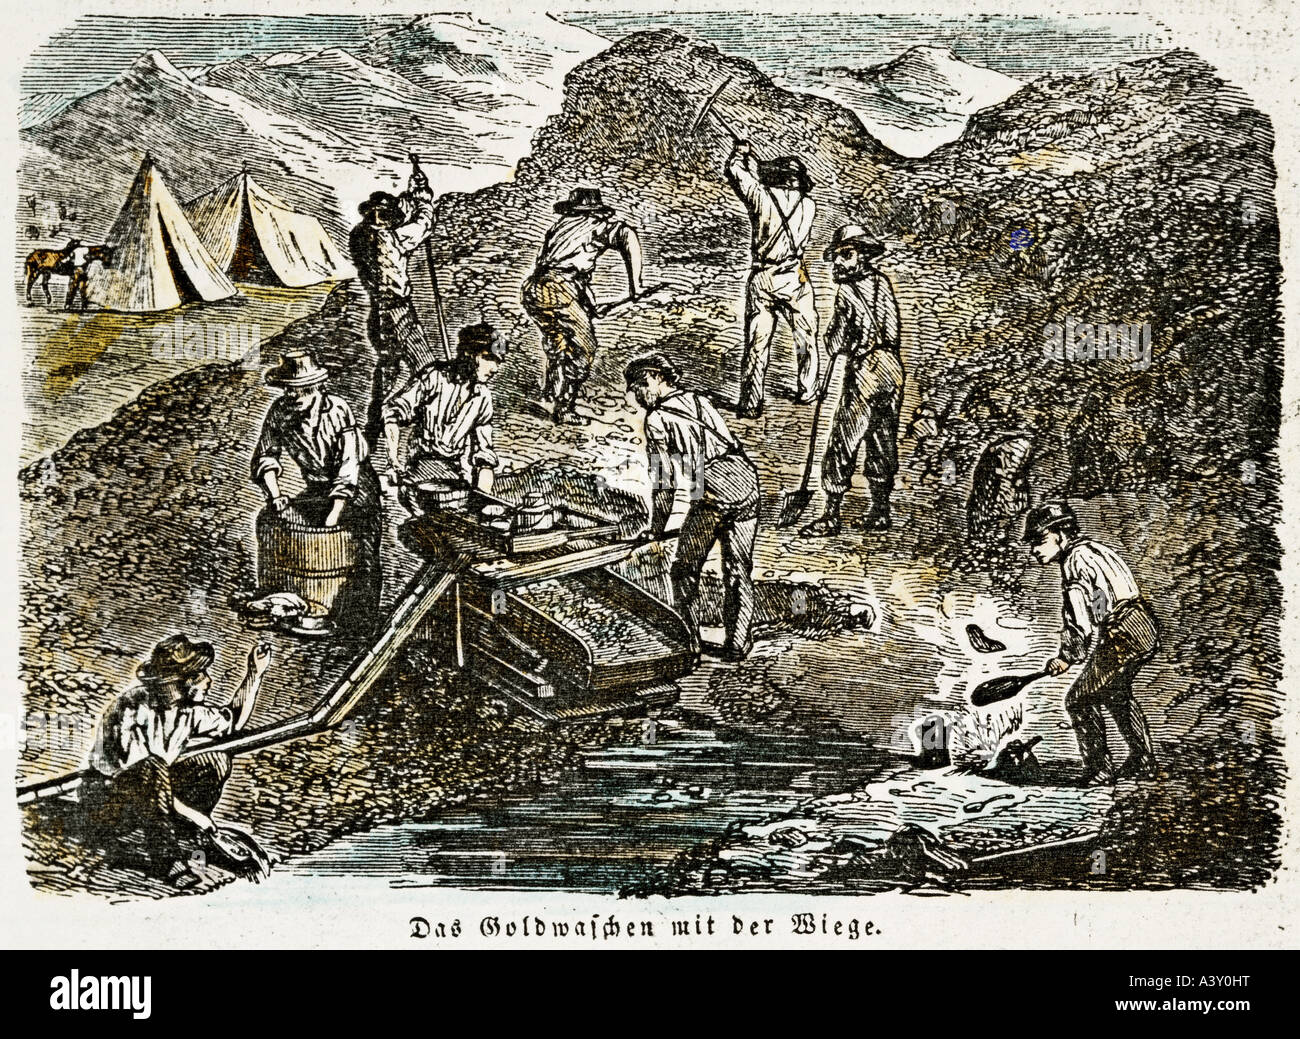 metal, gold, American gold diggers washing gold with cradle, colour engraving, Germany, circa 1870, private collection, , Stock Photo